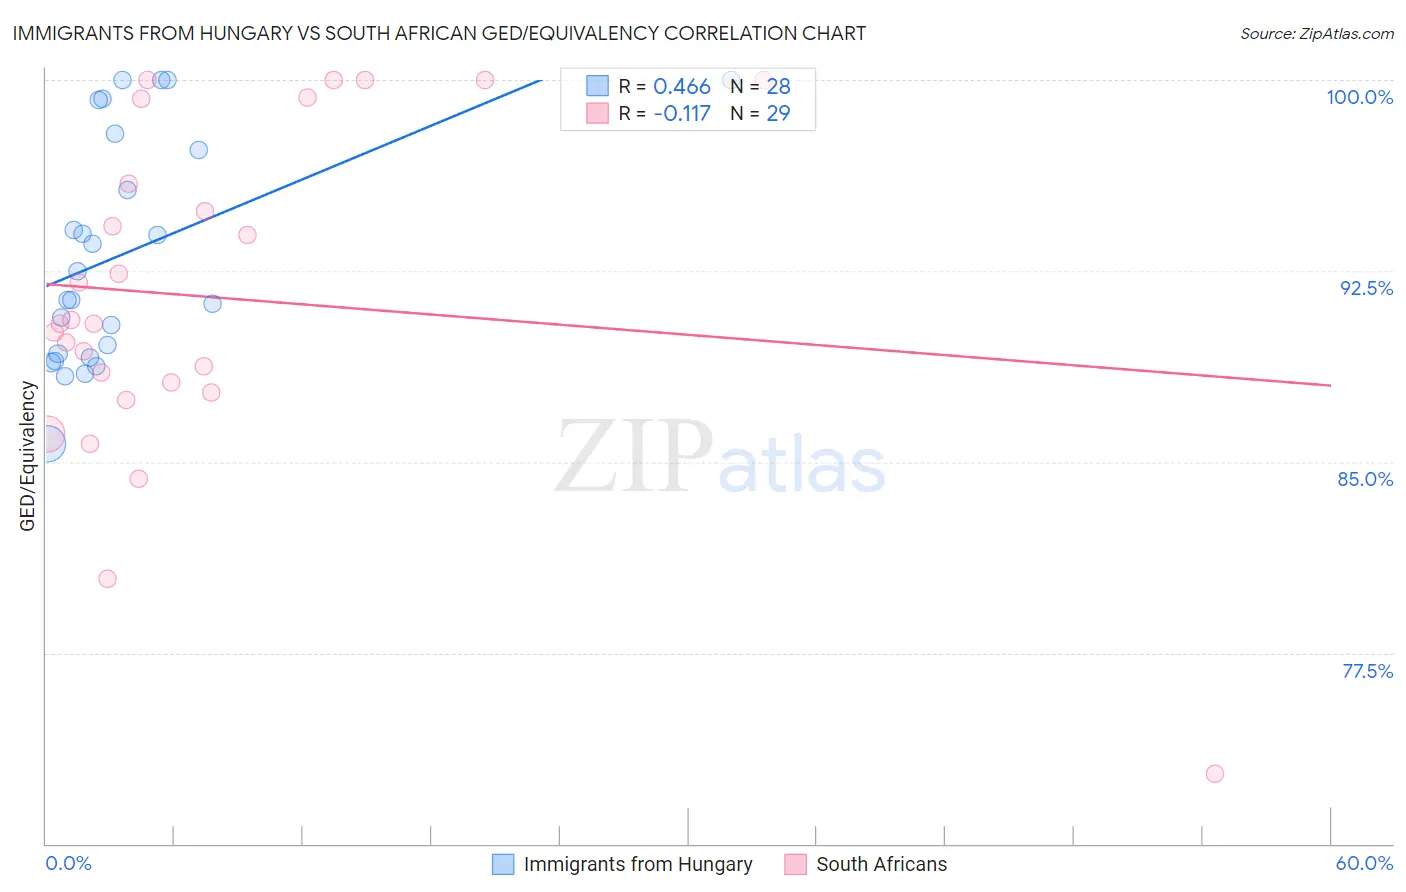 Immigrants from Hungary vs South African GED/Equivalency